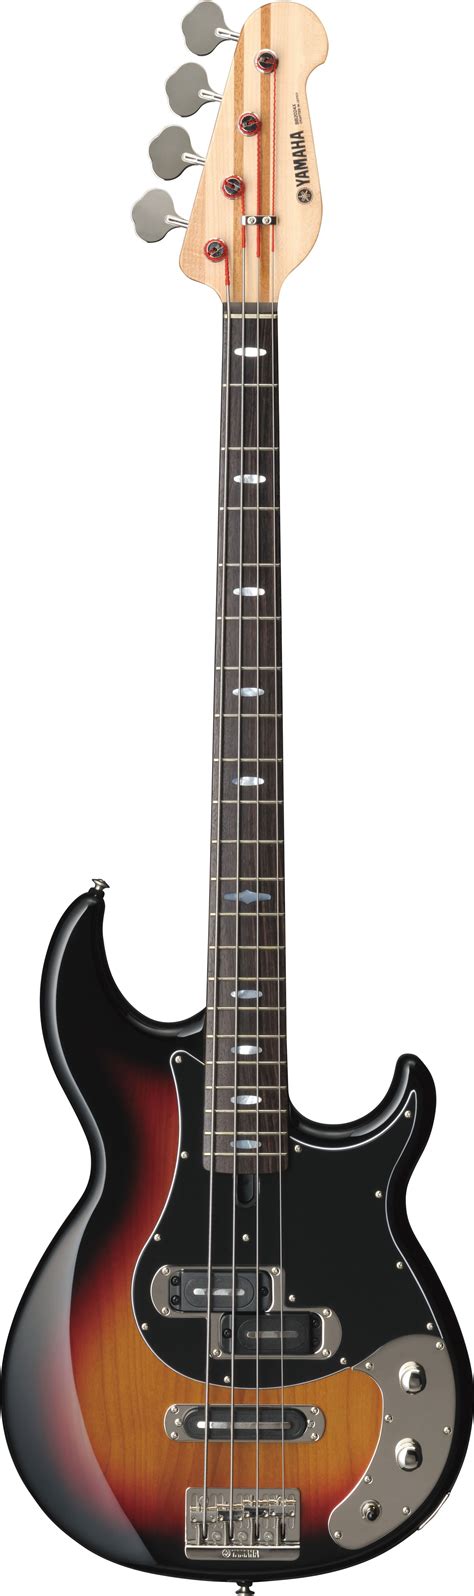 Bb Series Overview Basses Guitars Basses And Amps Musical